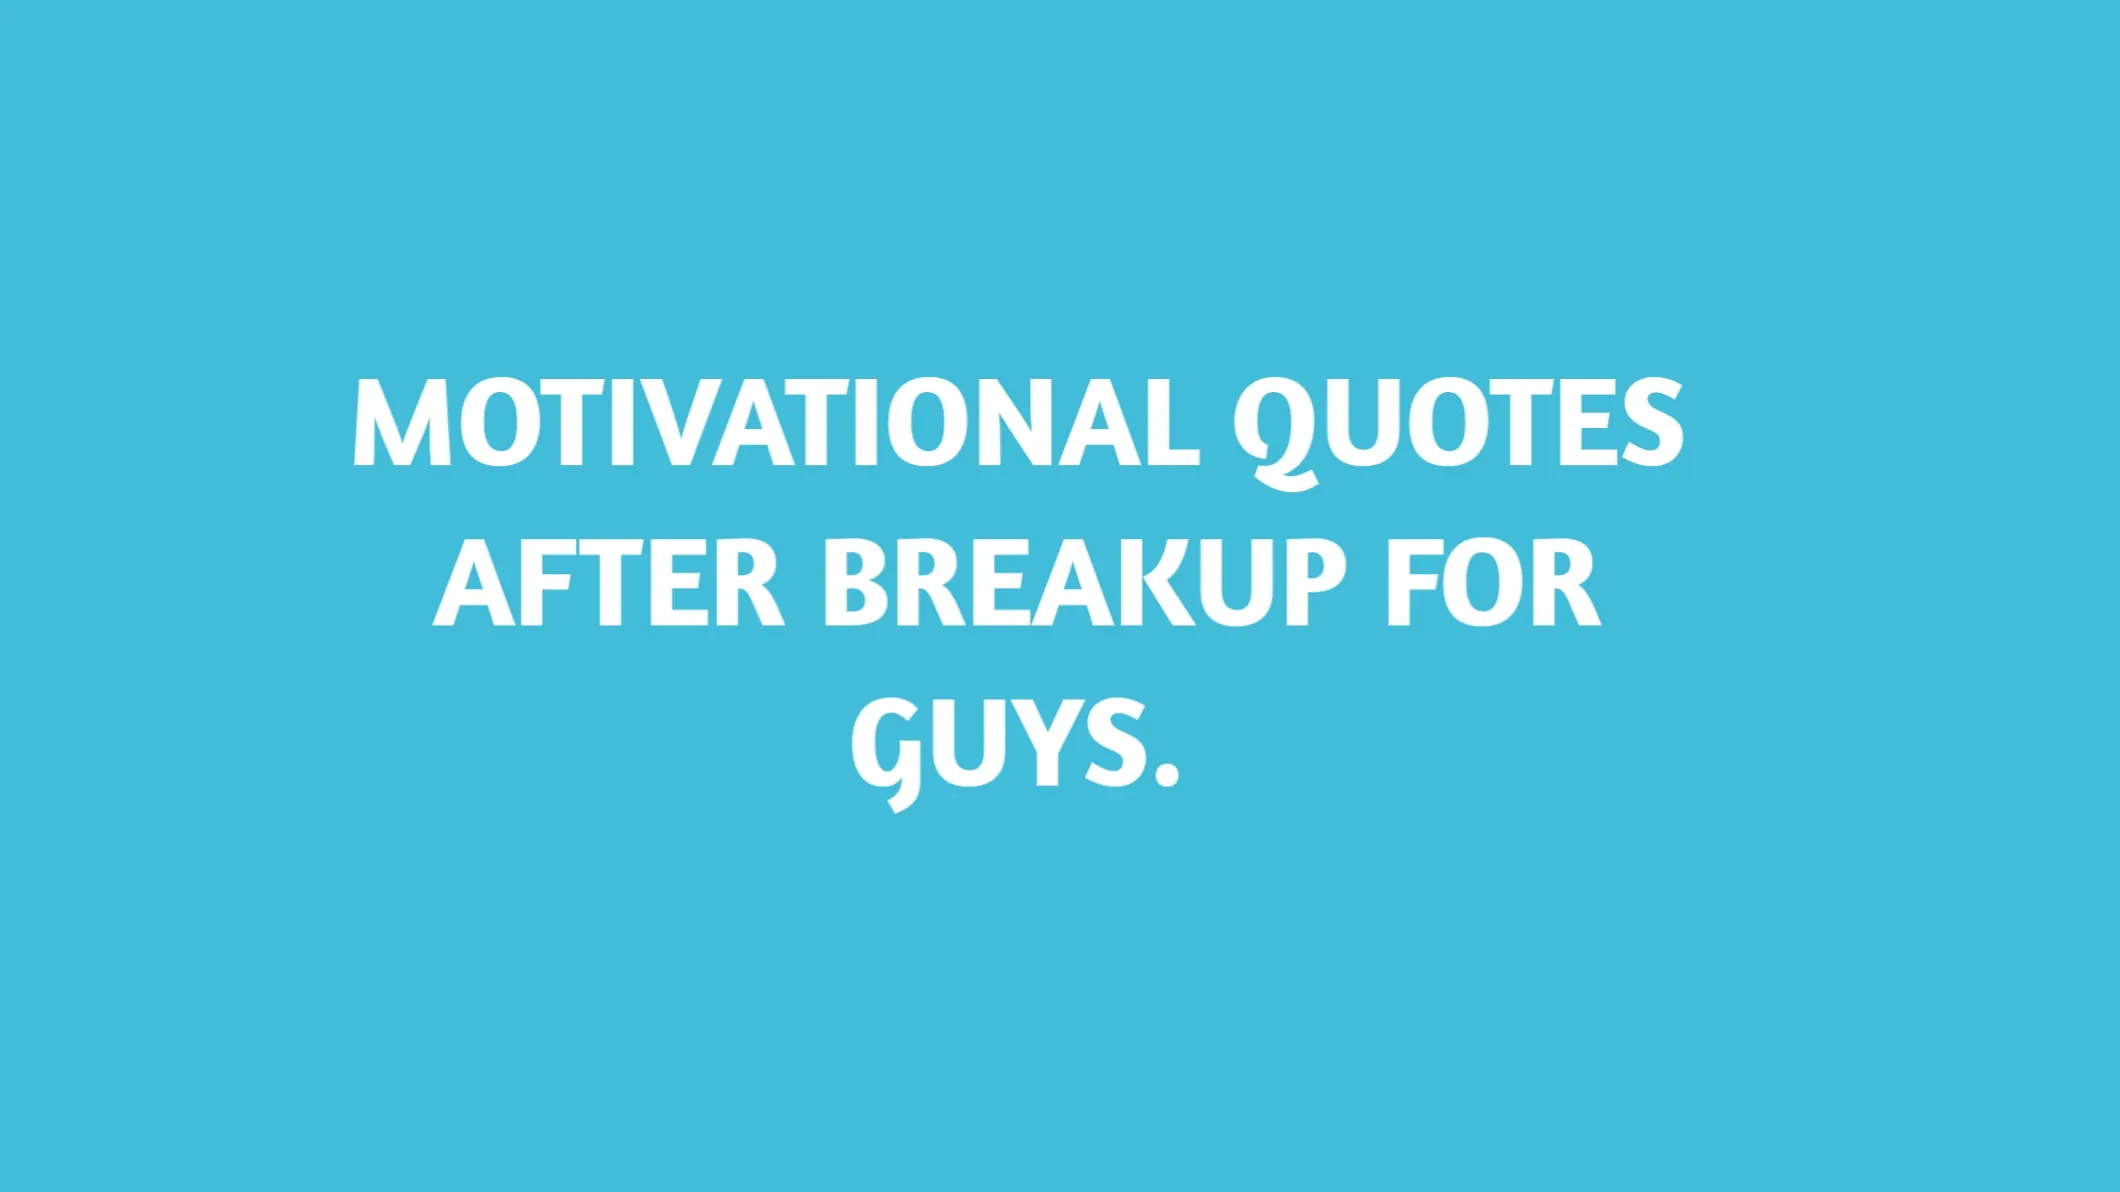 Motivational quotes after Breakup for guys.